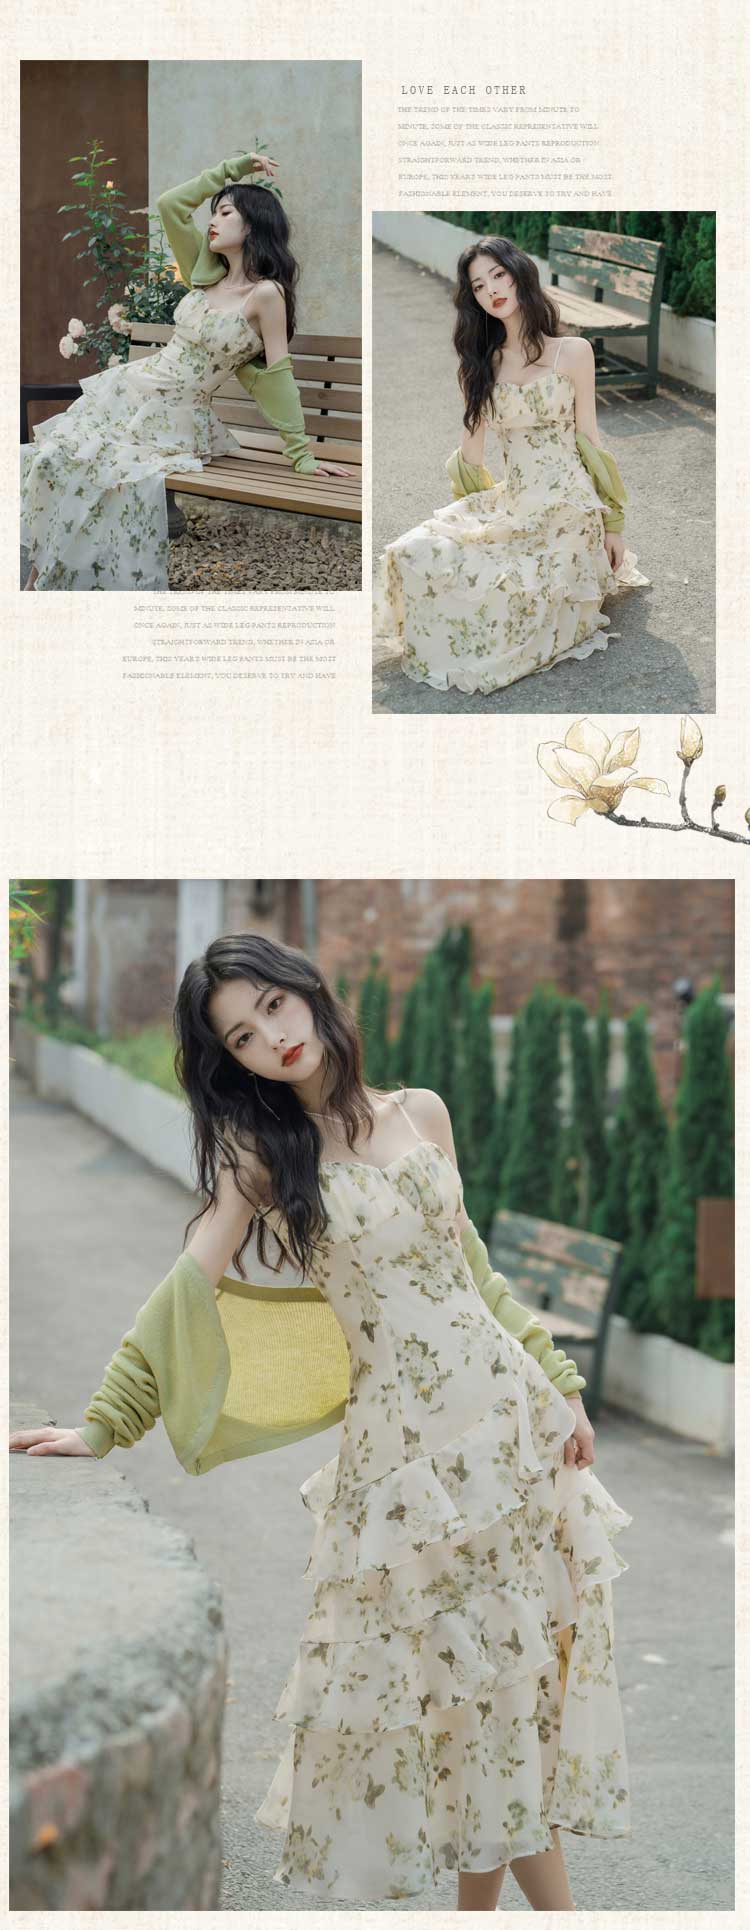 Floral-Green-Summer-Leisure-Slip-Dress-with-Cardigan-Casual-Outfit12